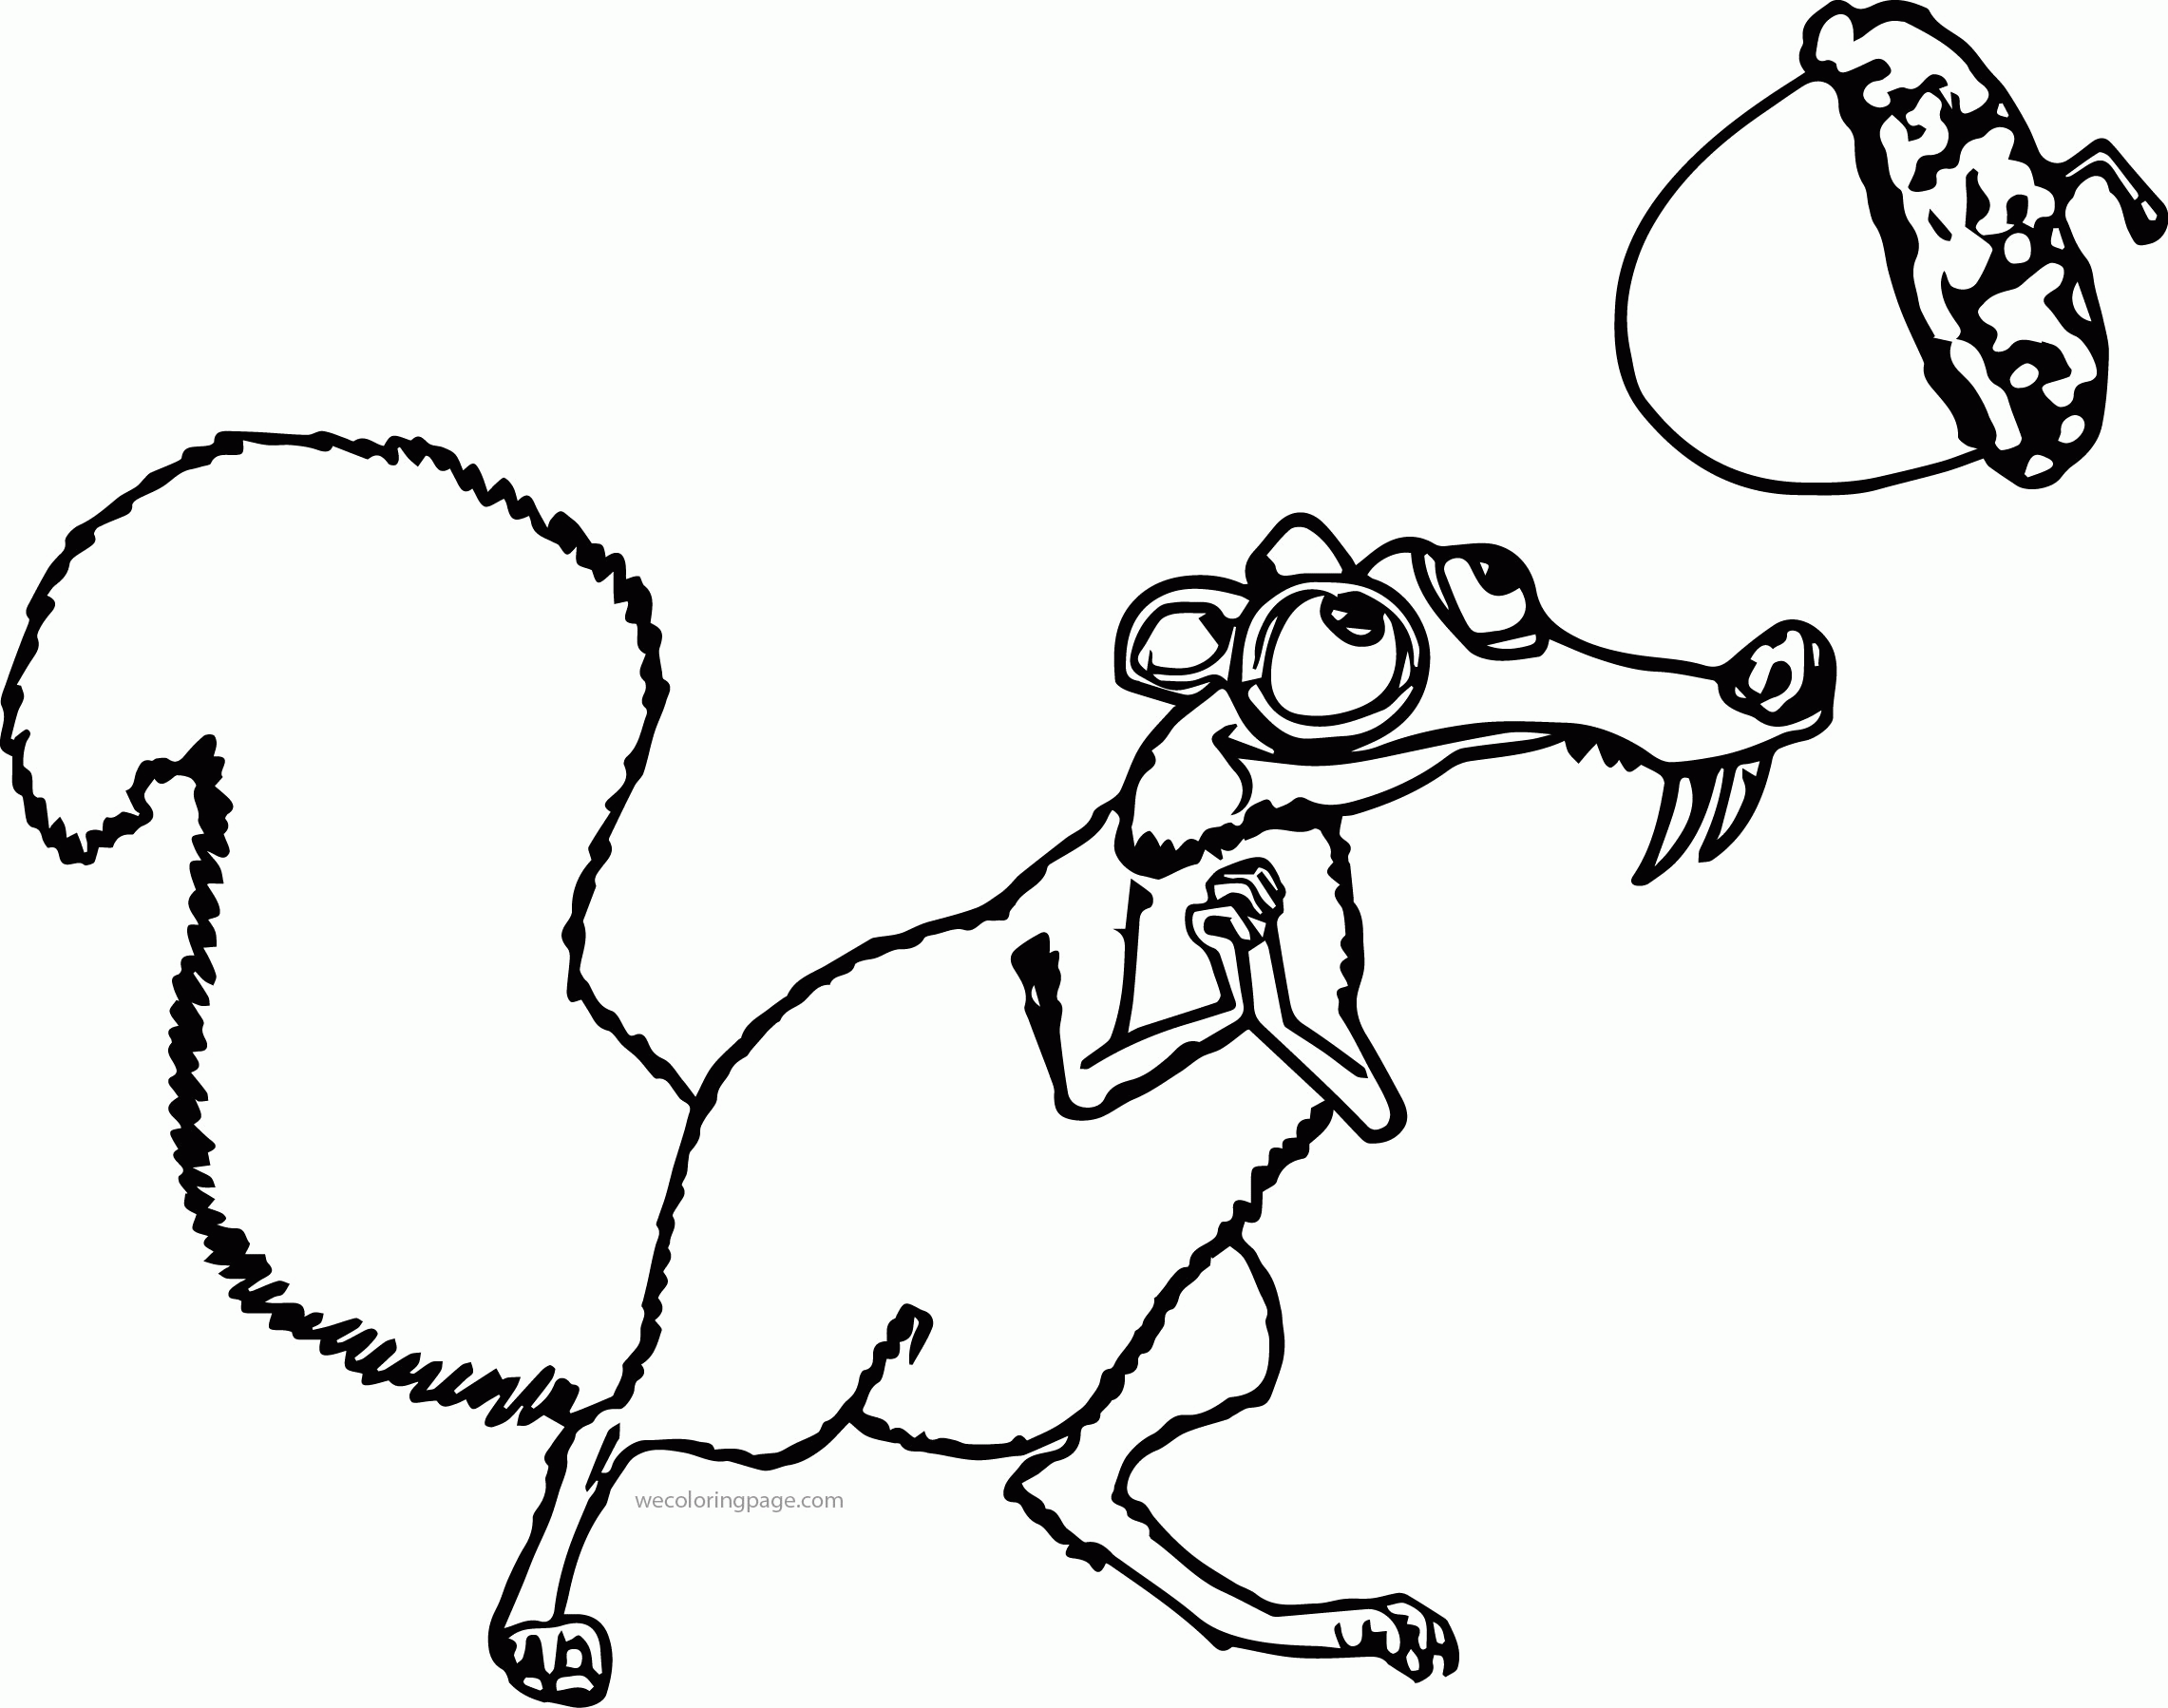 Scrat from the movie ice age 4 Coloring Page